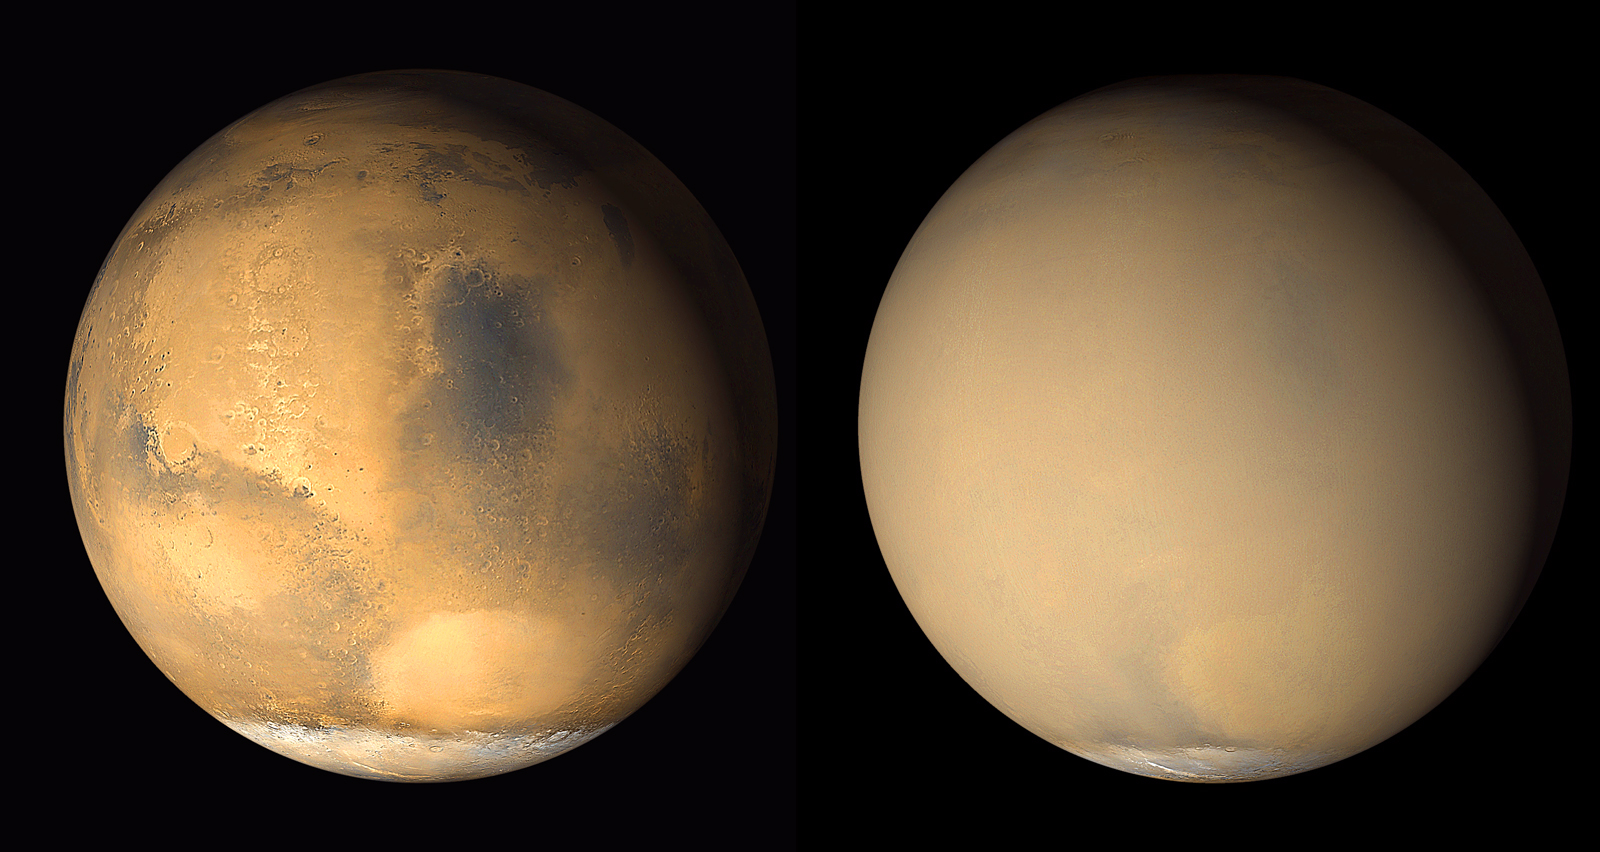 planet's appearance before and during a global dust storm (the entire surface is masked by the dust storm)